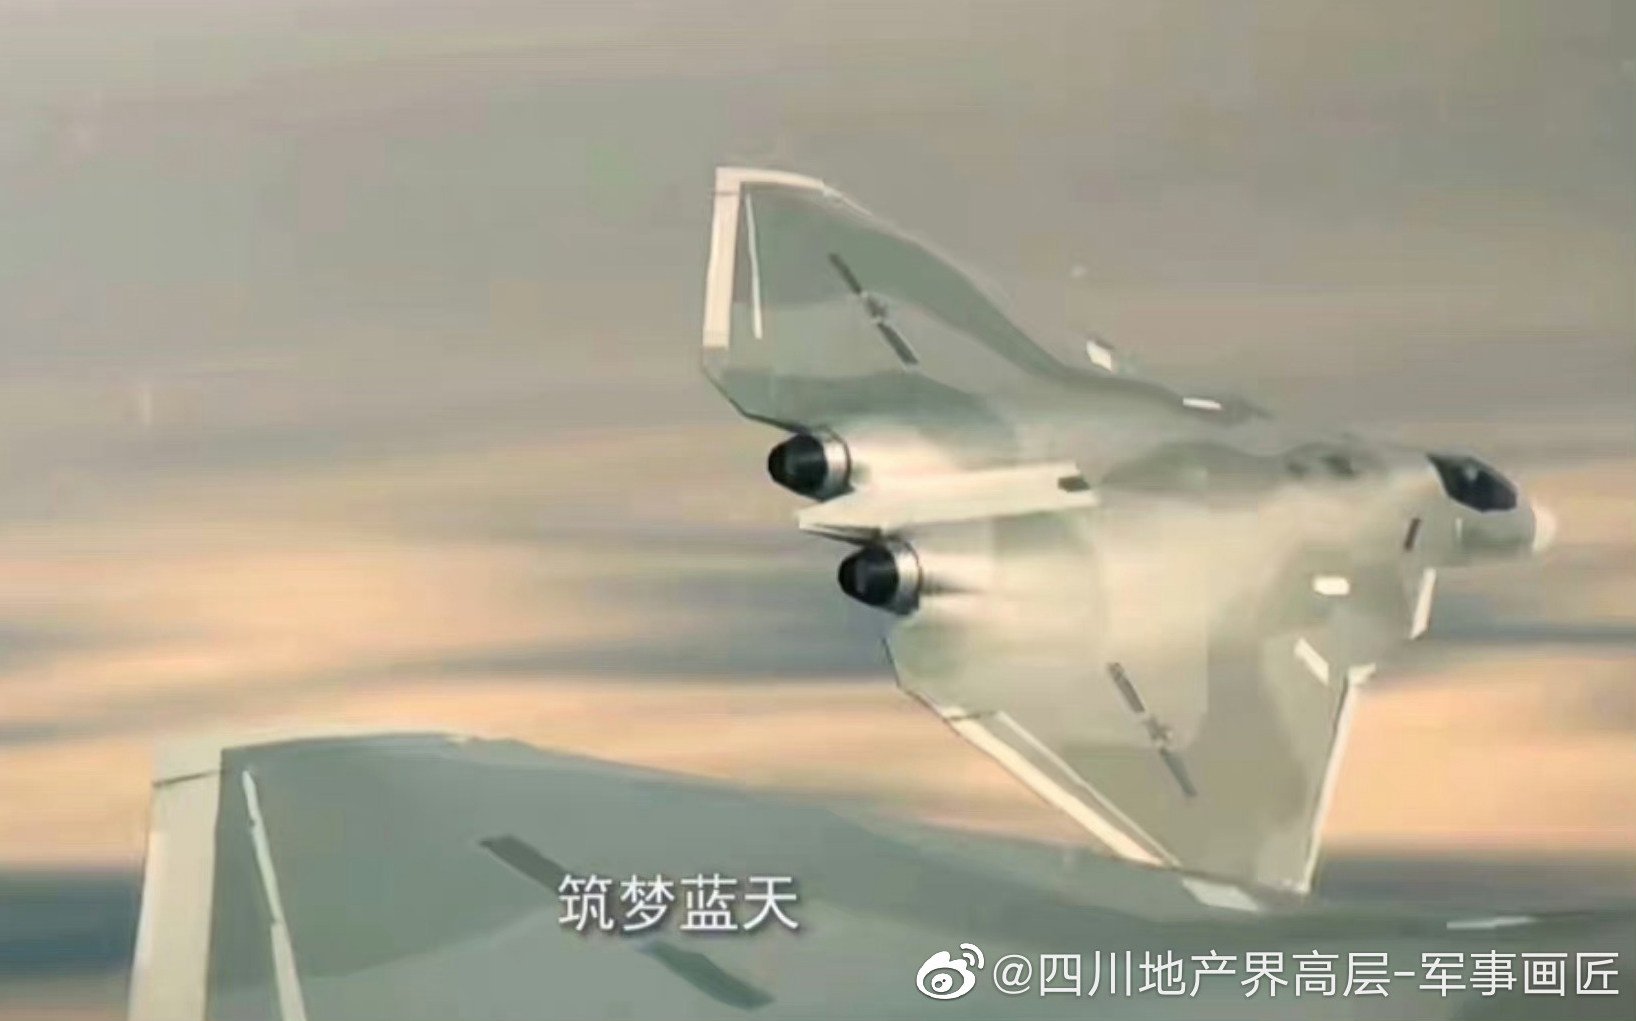 China further clues about for sixth-generation fighter planes South Morning Post